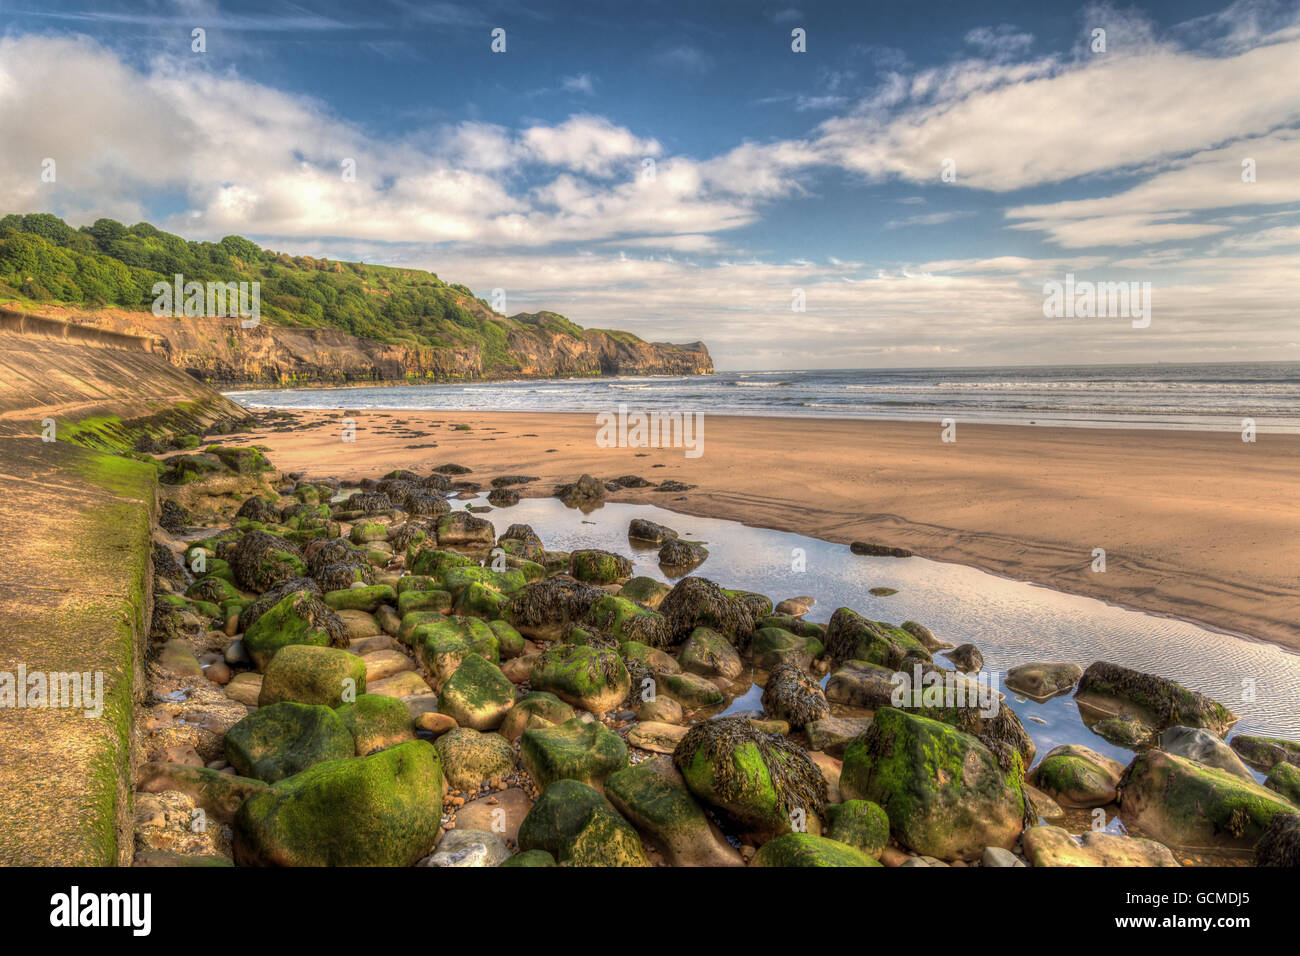 The beach at Sandsend, low tide. Stock Photo